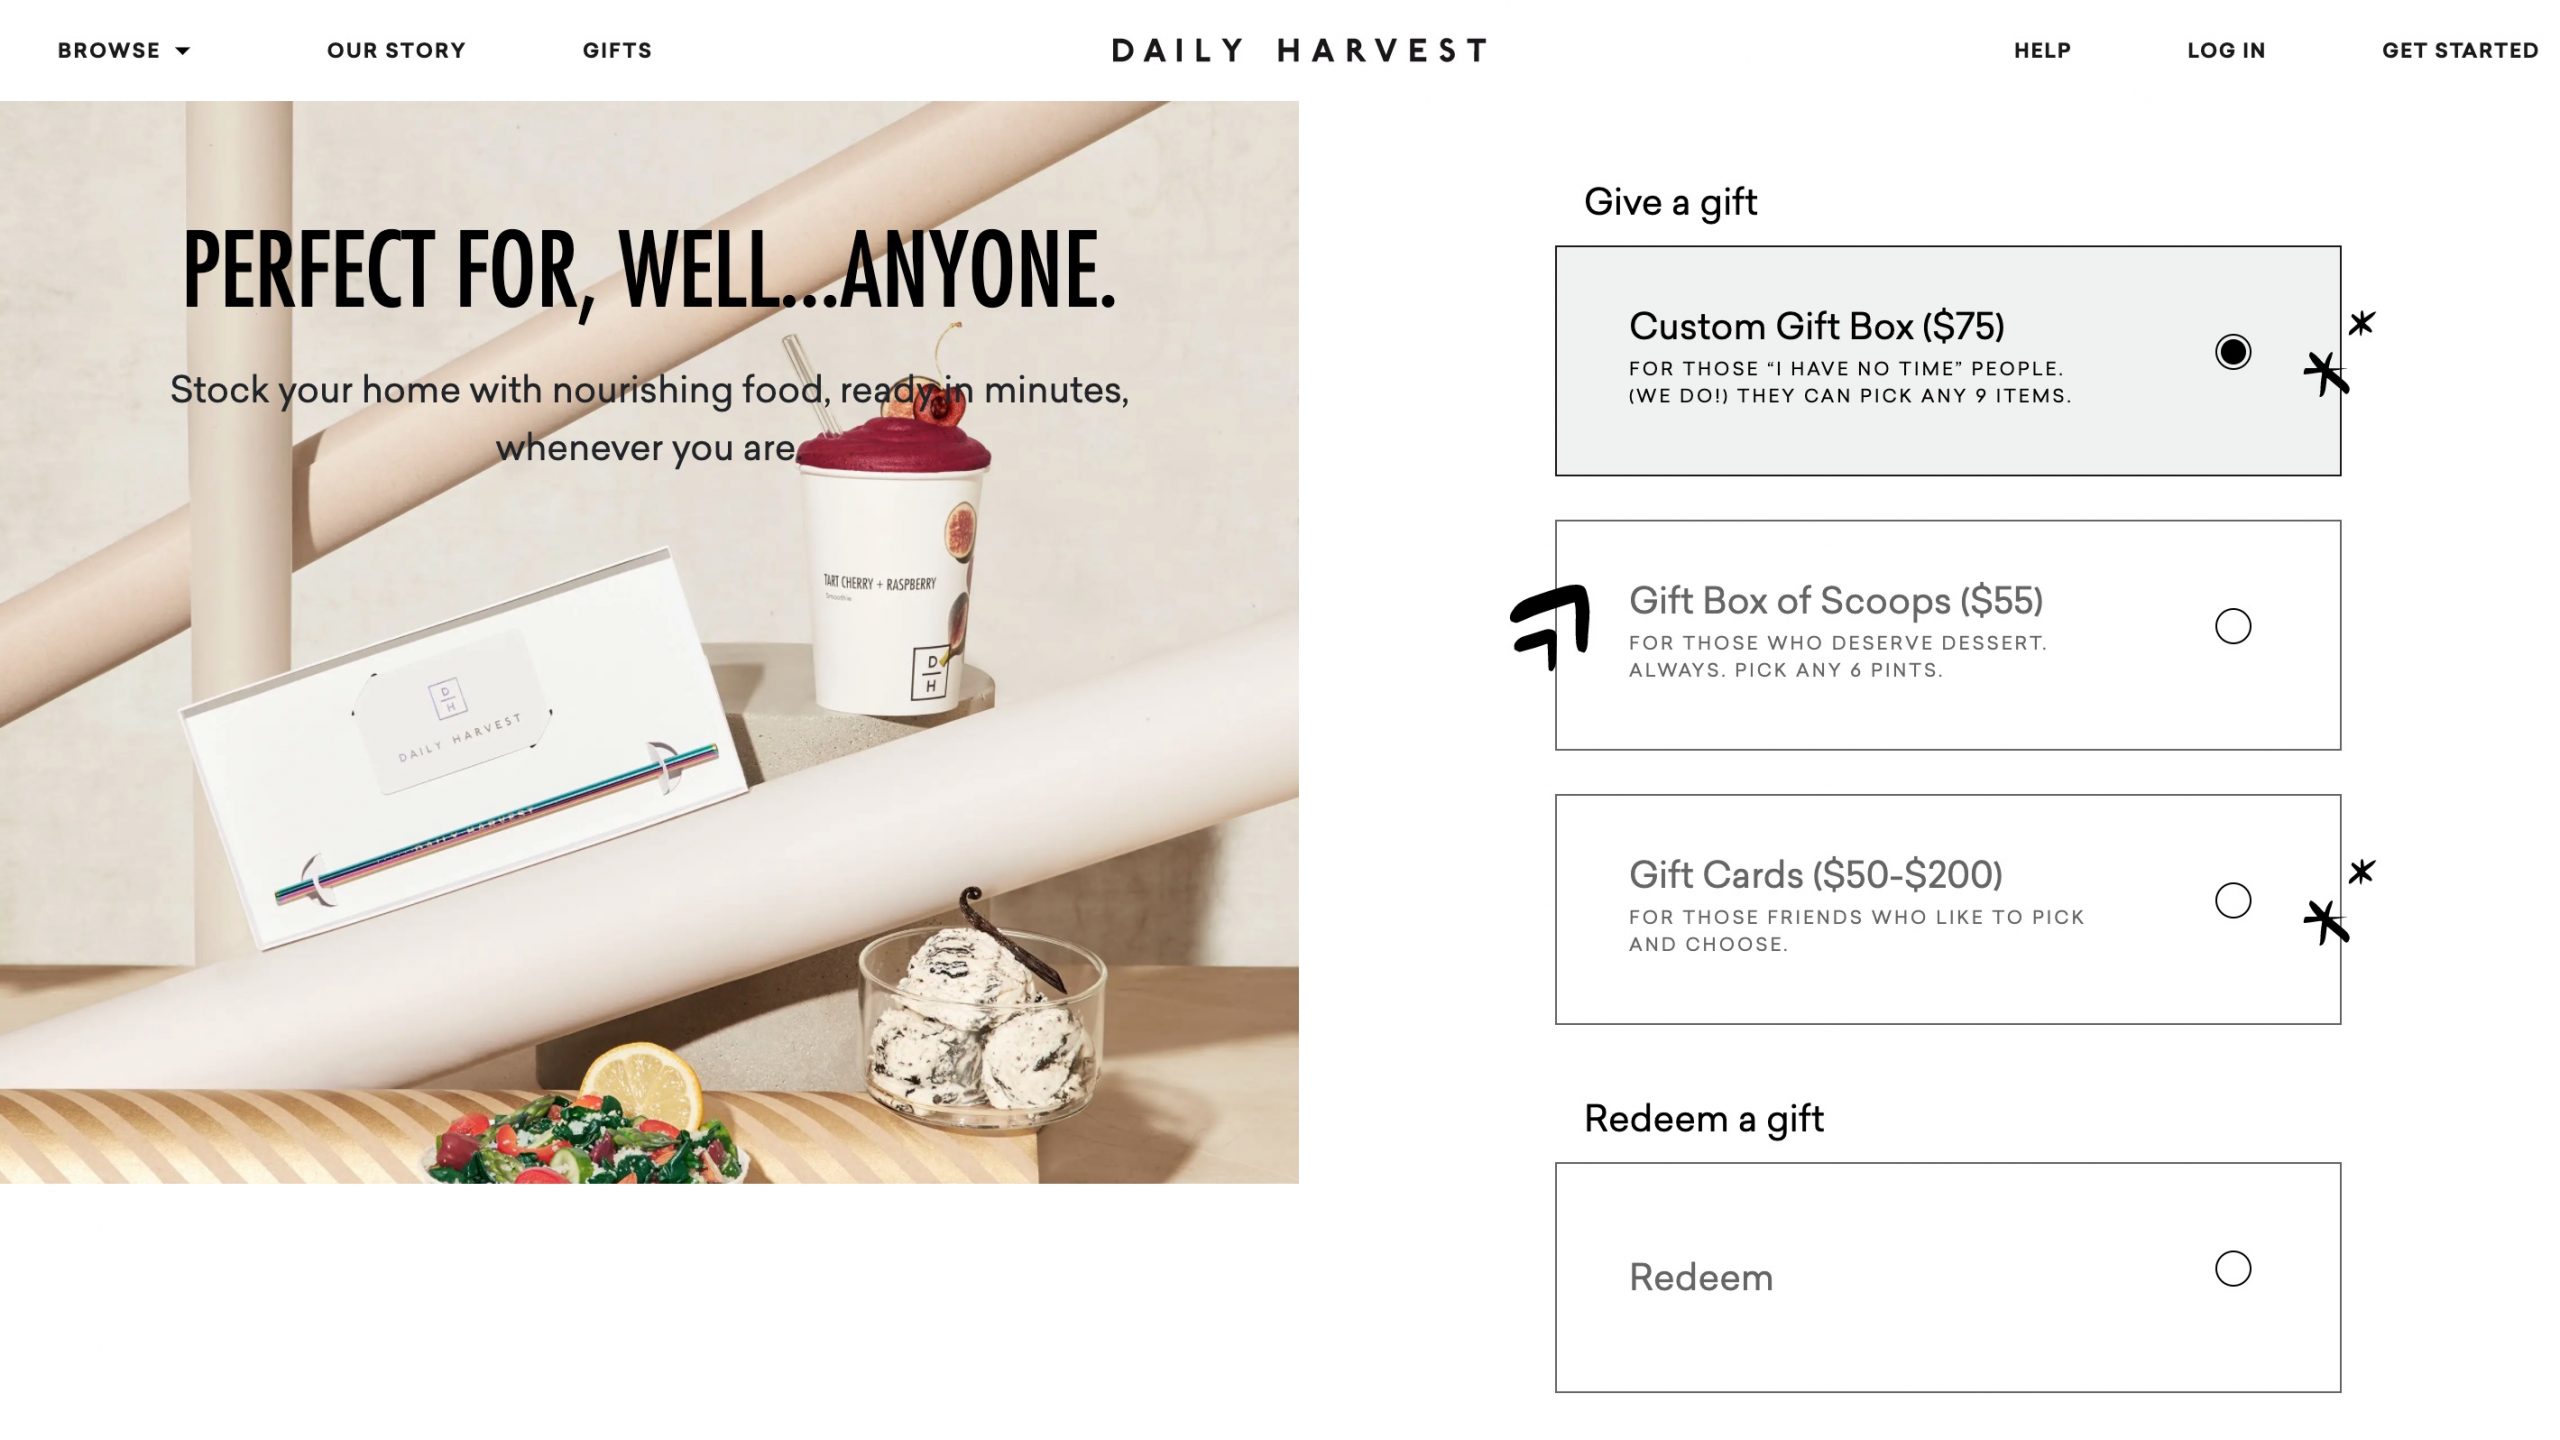 Daily Harvest gift cards